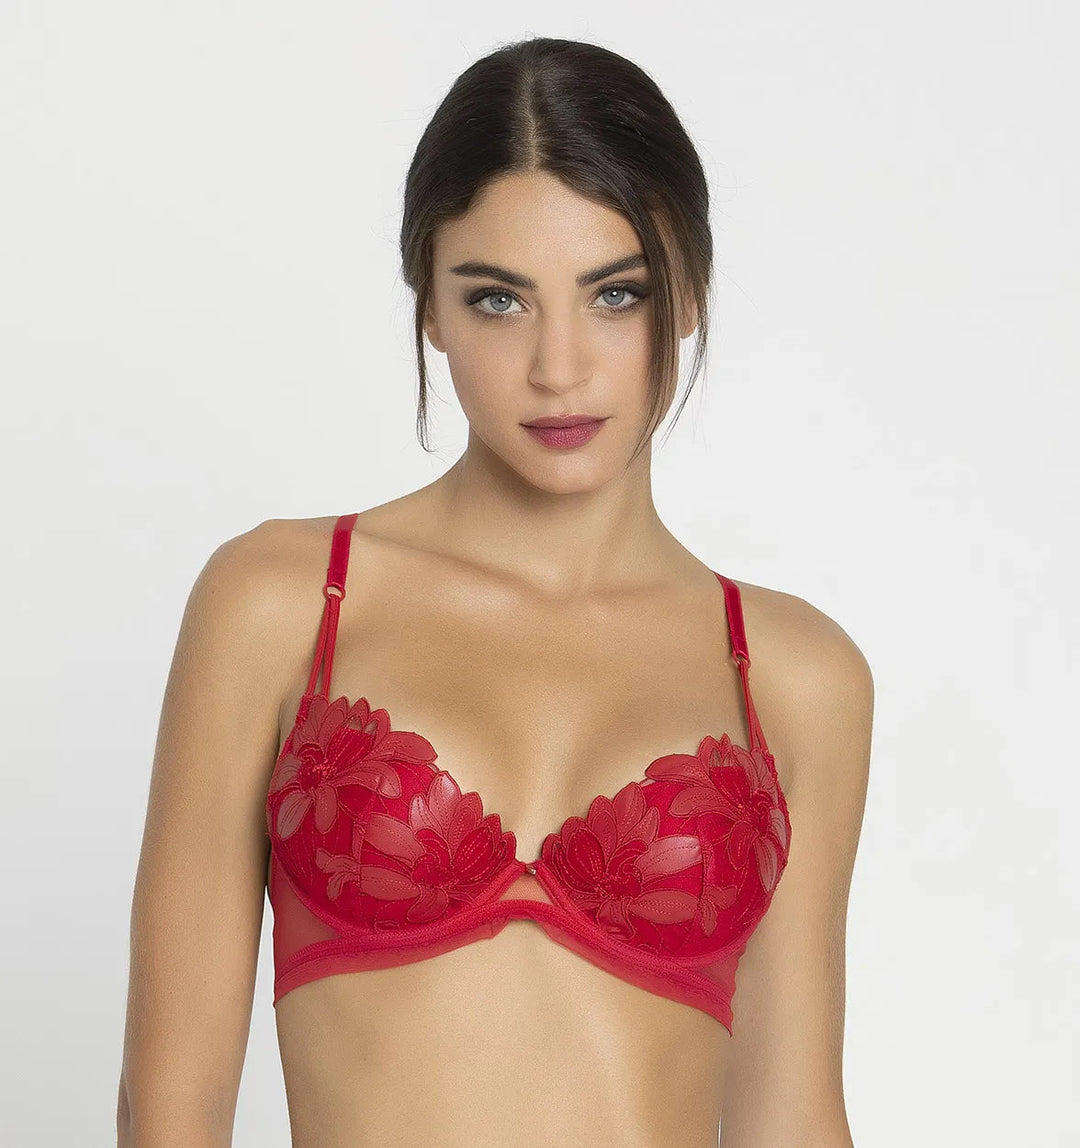 Lise Charmel - Glamour Couture Contour Bra Glam Desir Contour Bra Lise Charmel 